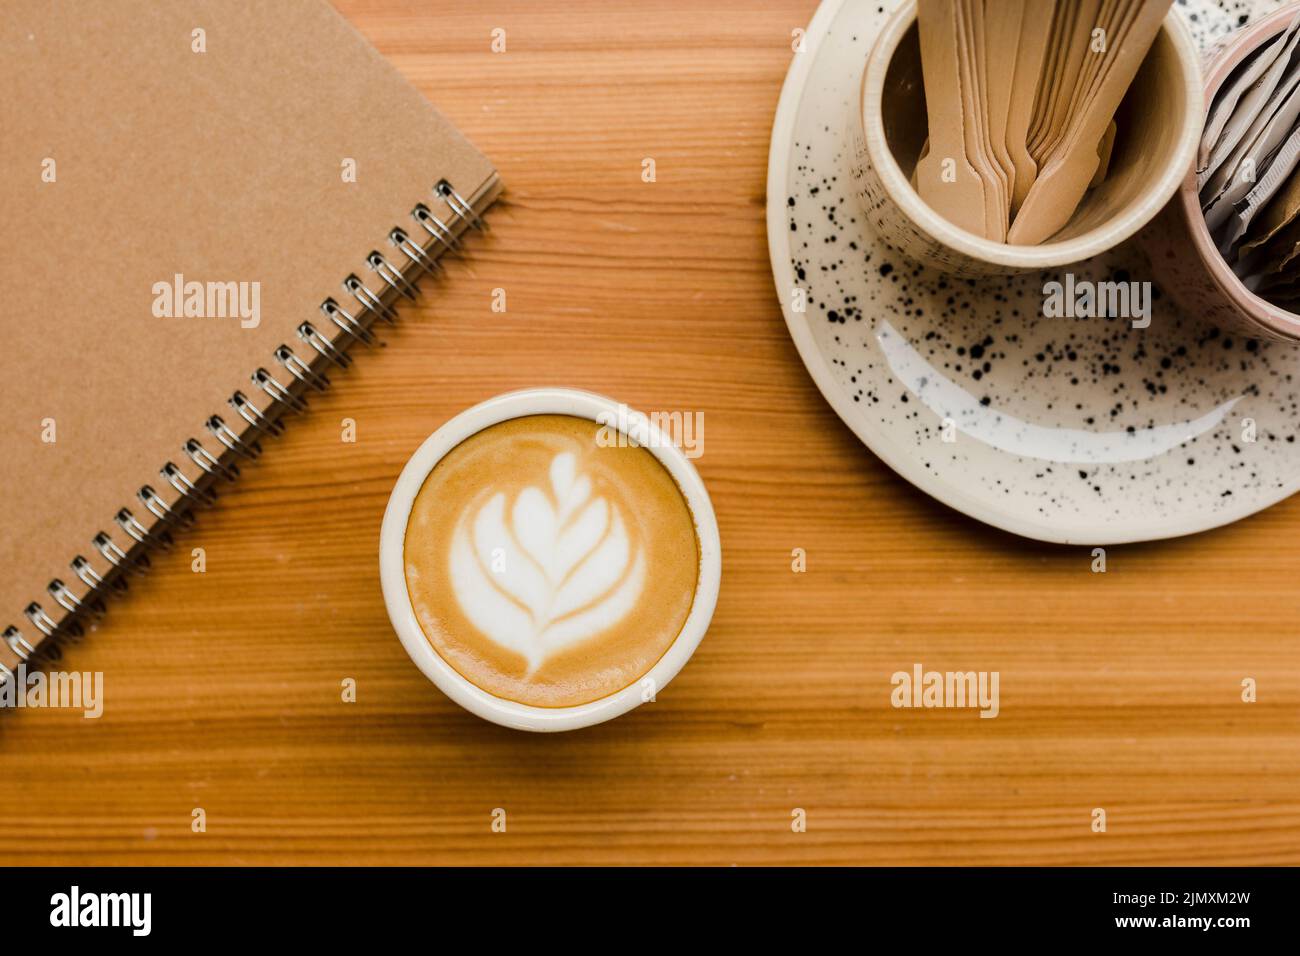 Top view desk with cup cofee Stock Photo